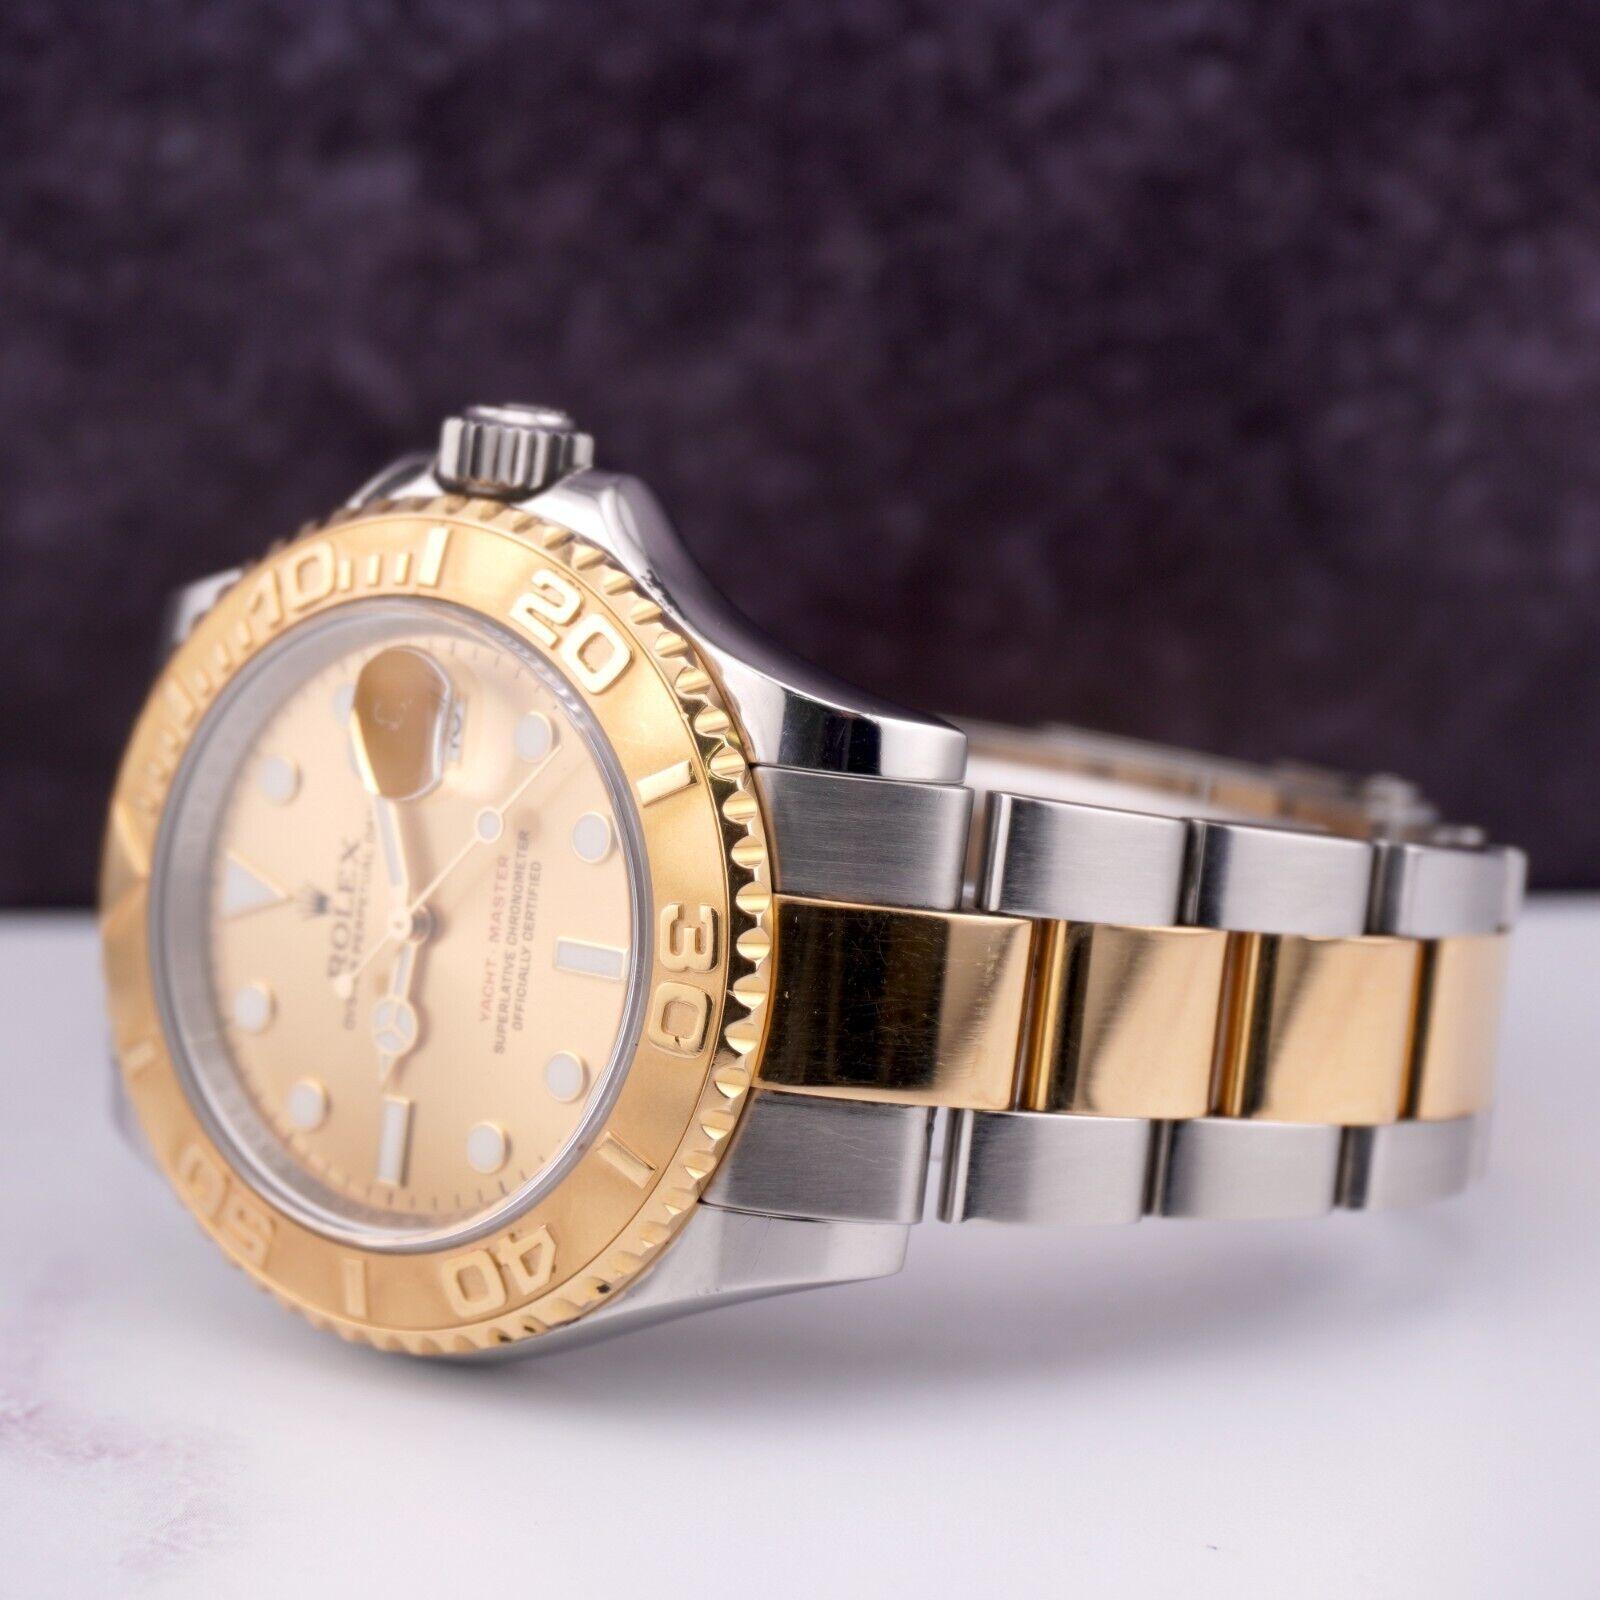 Rolex Yacht-Master 40mm Oyster Date 18k Yellow Gold & Steel Watch Dial 16623 For Sale 1